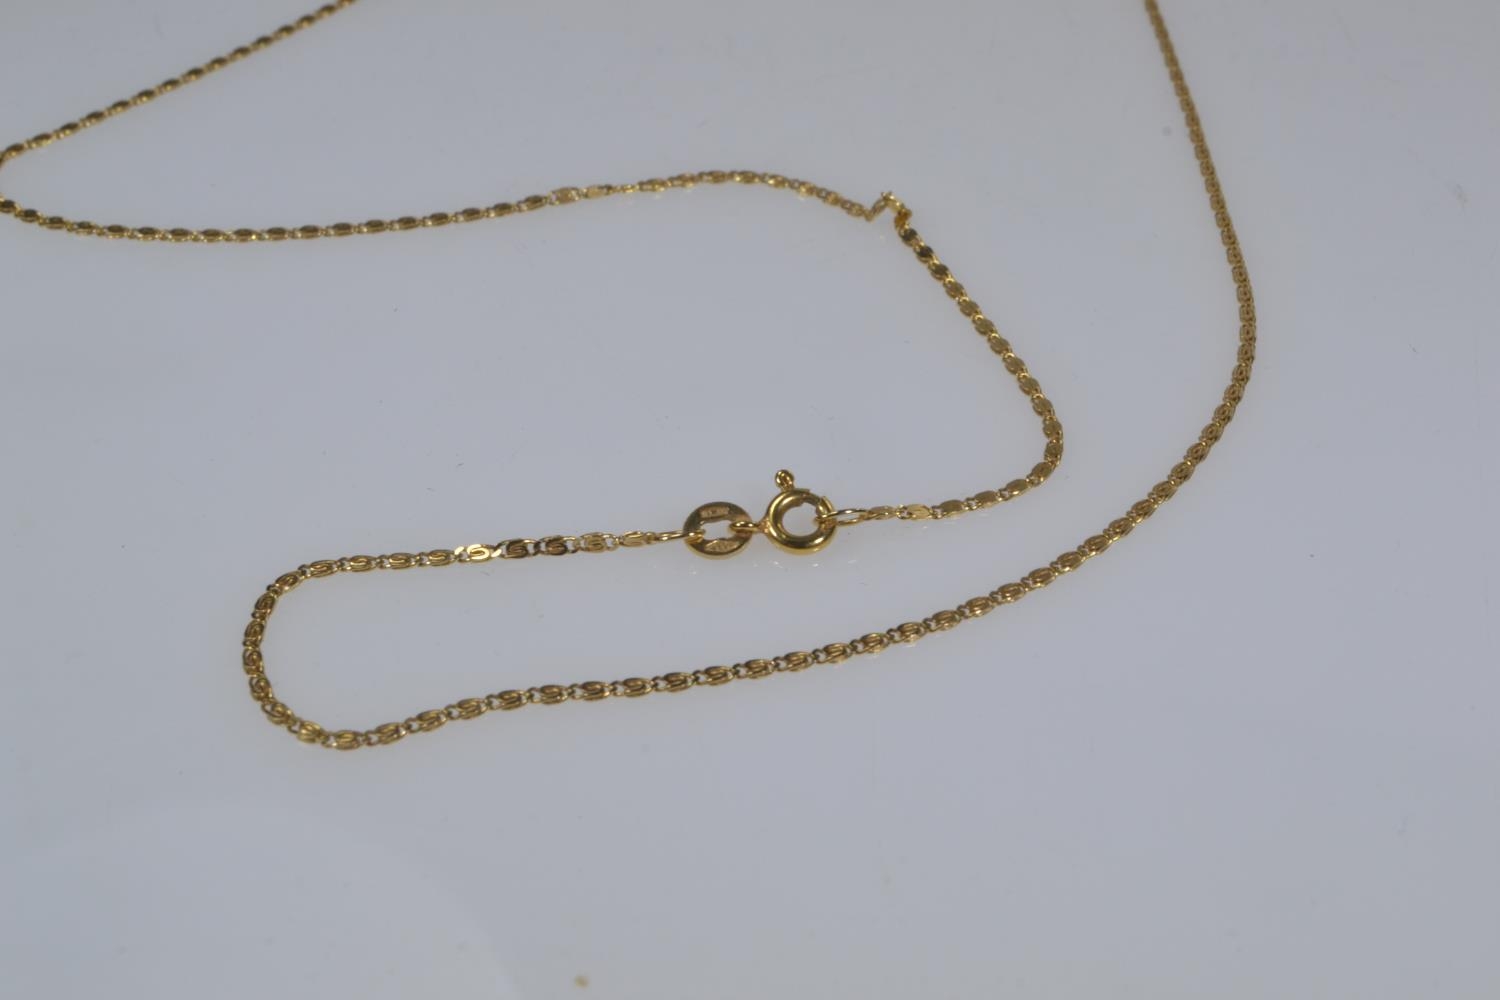 14ct gold scroll link neck chain, circumference 545mm, 2.6 grams 